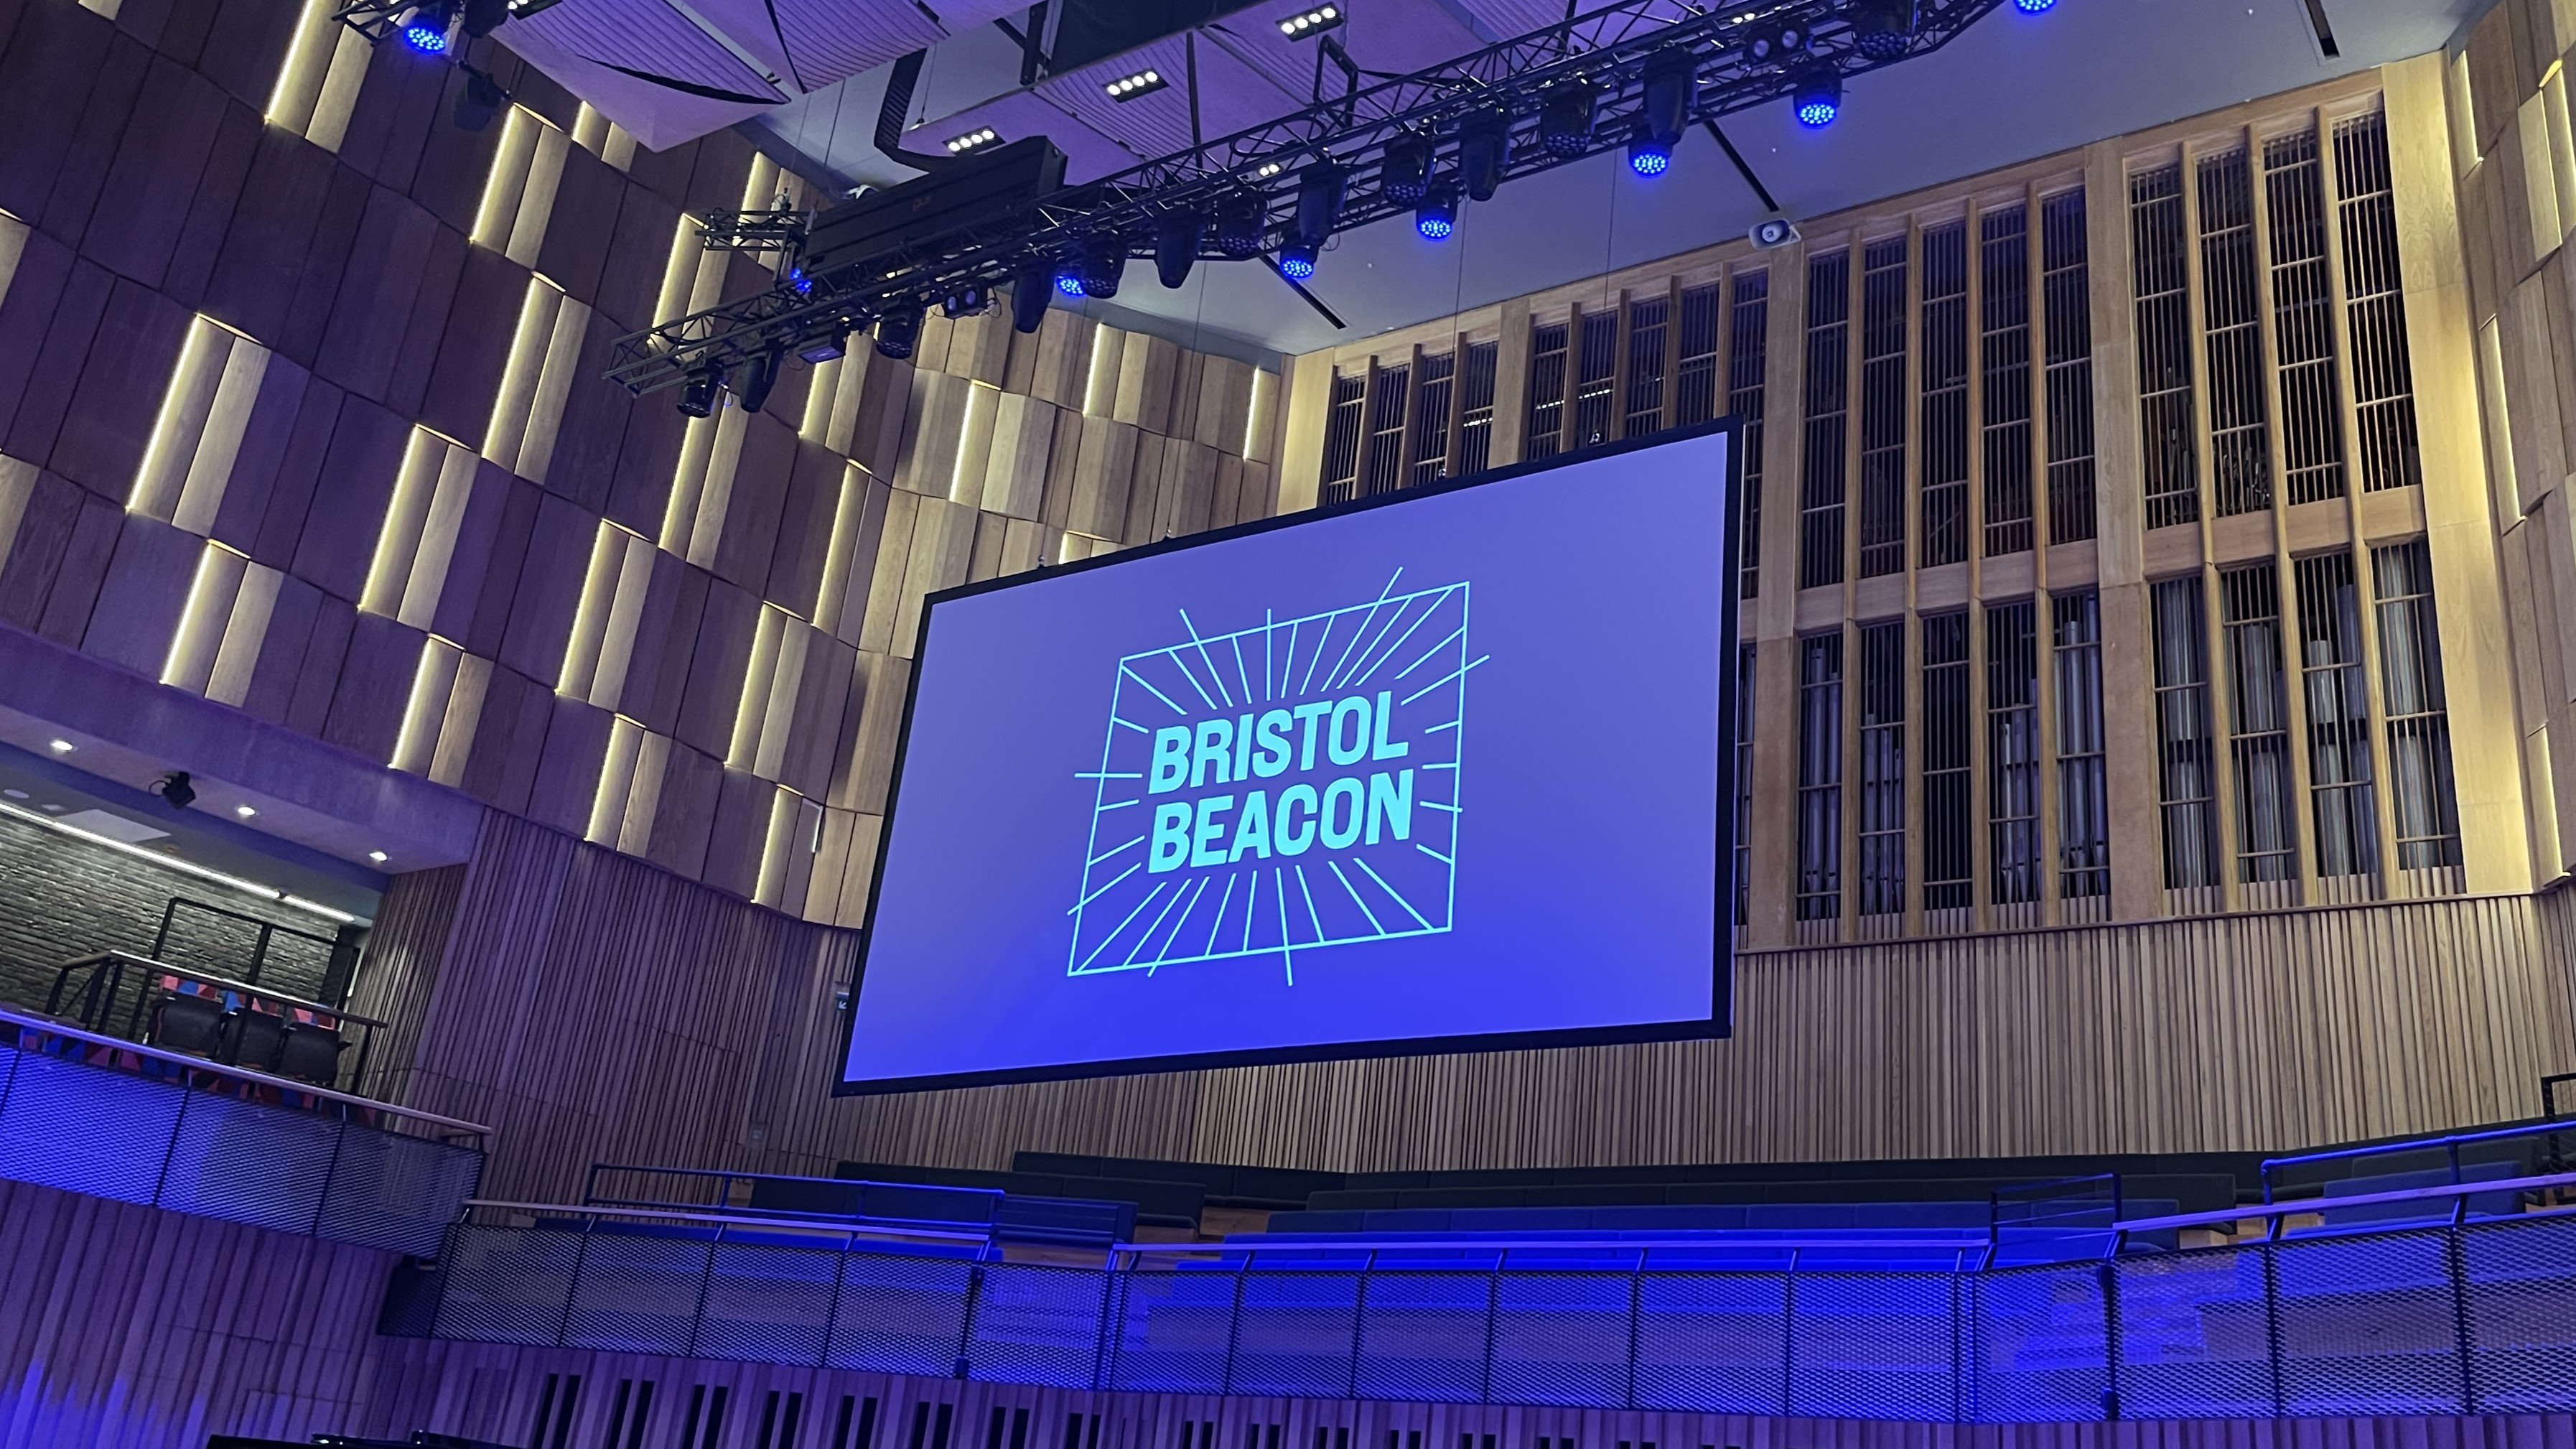 Bristol Water supports the Bristol Beacon as it reopens following major refurbishment